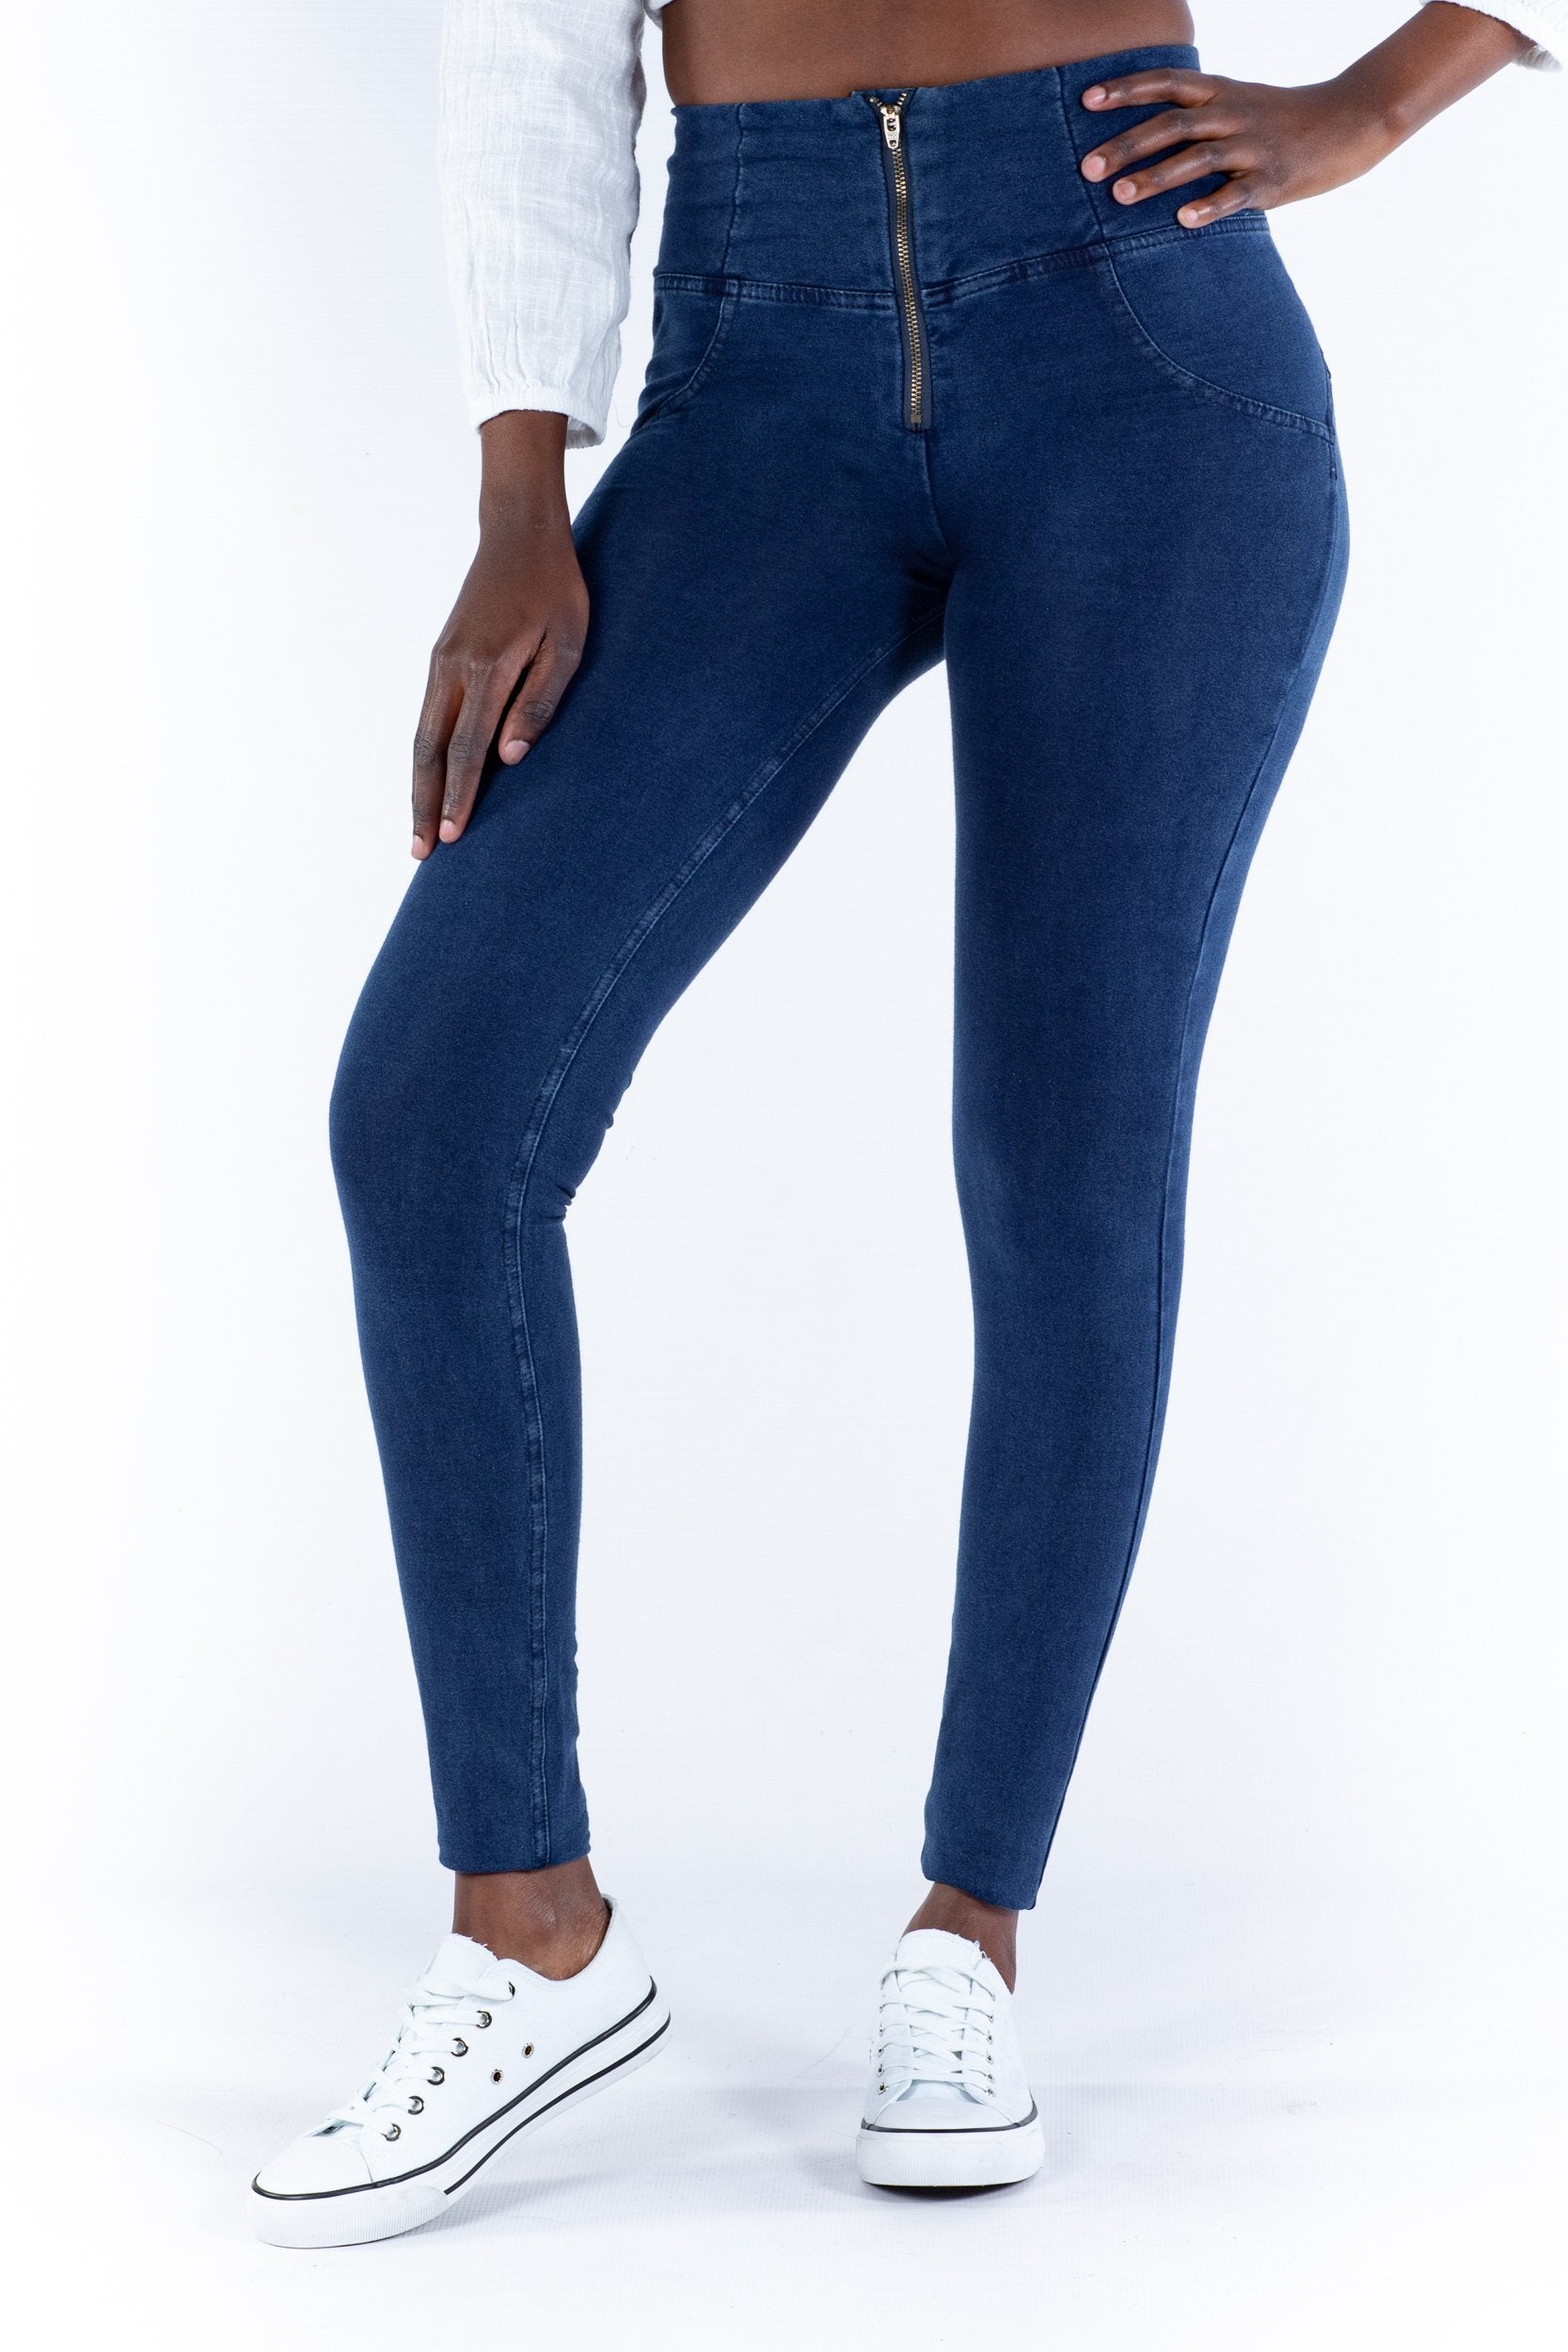 Image of High waist Butt lifting Shaping jeans/Jeggings - Dark Blue